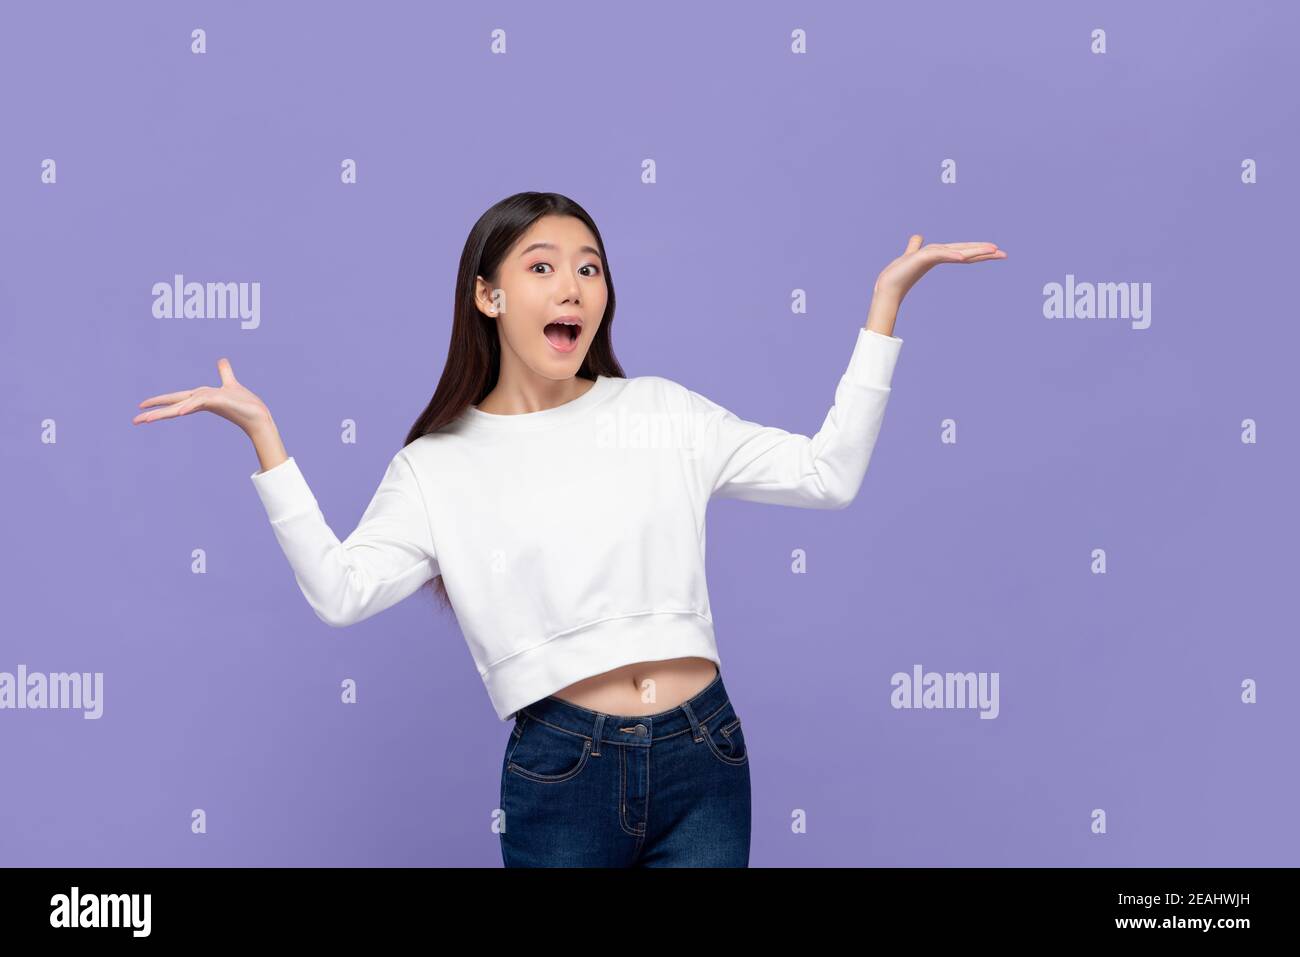 Beautiful excited young Asian woman doing presenting gesture with both hands open isolated on purple background Stock Photo